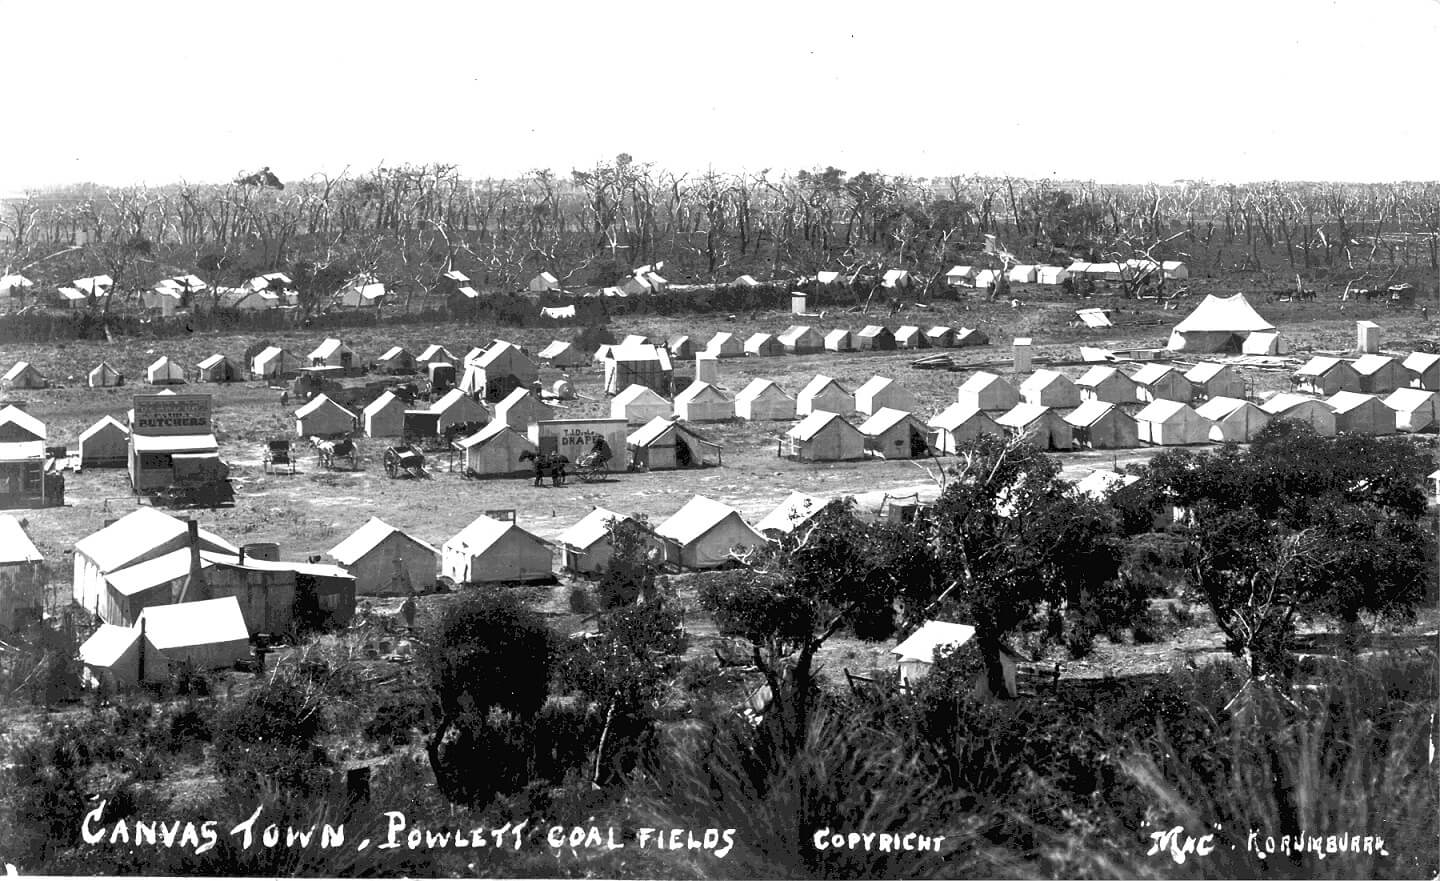 A clearing of bush with housing tents lined up in rows. Some of the tents have professional signs, one for the butcher and one for the draper.